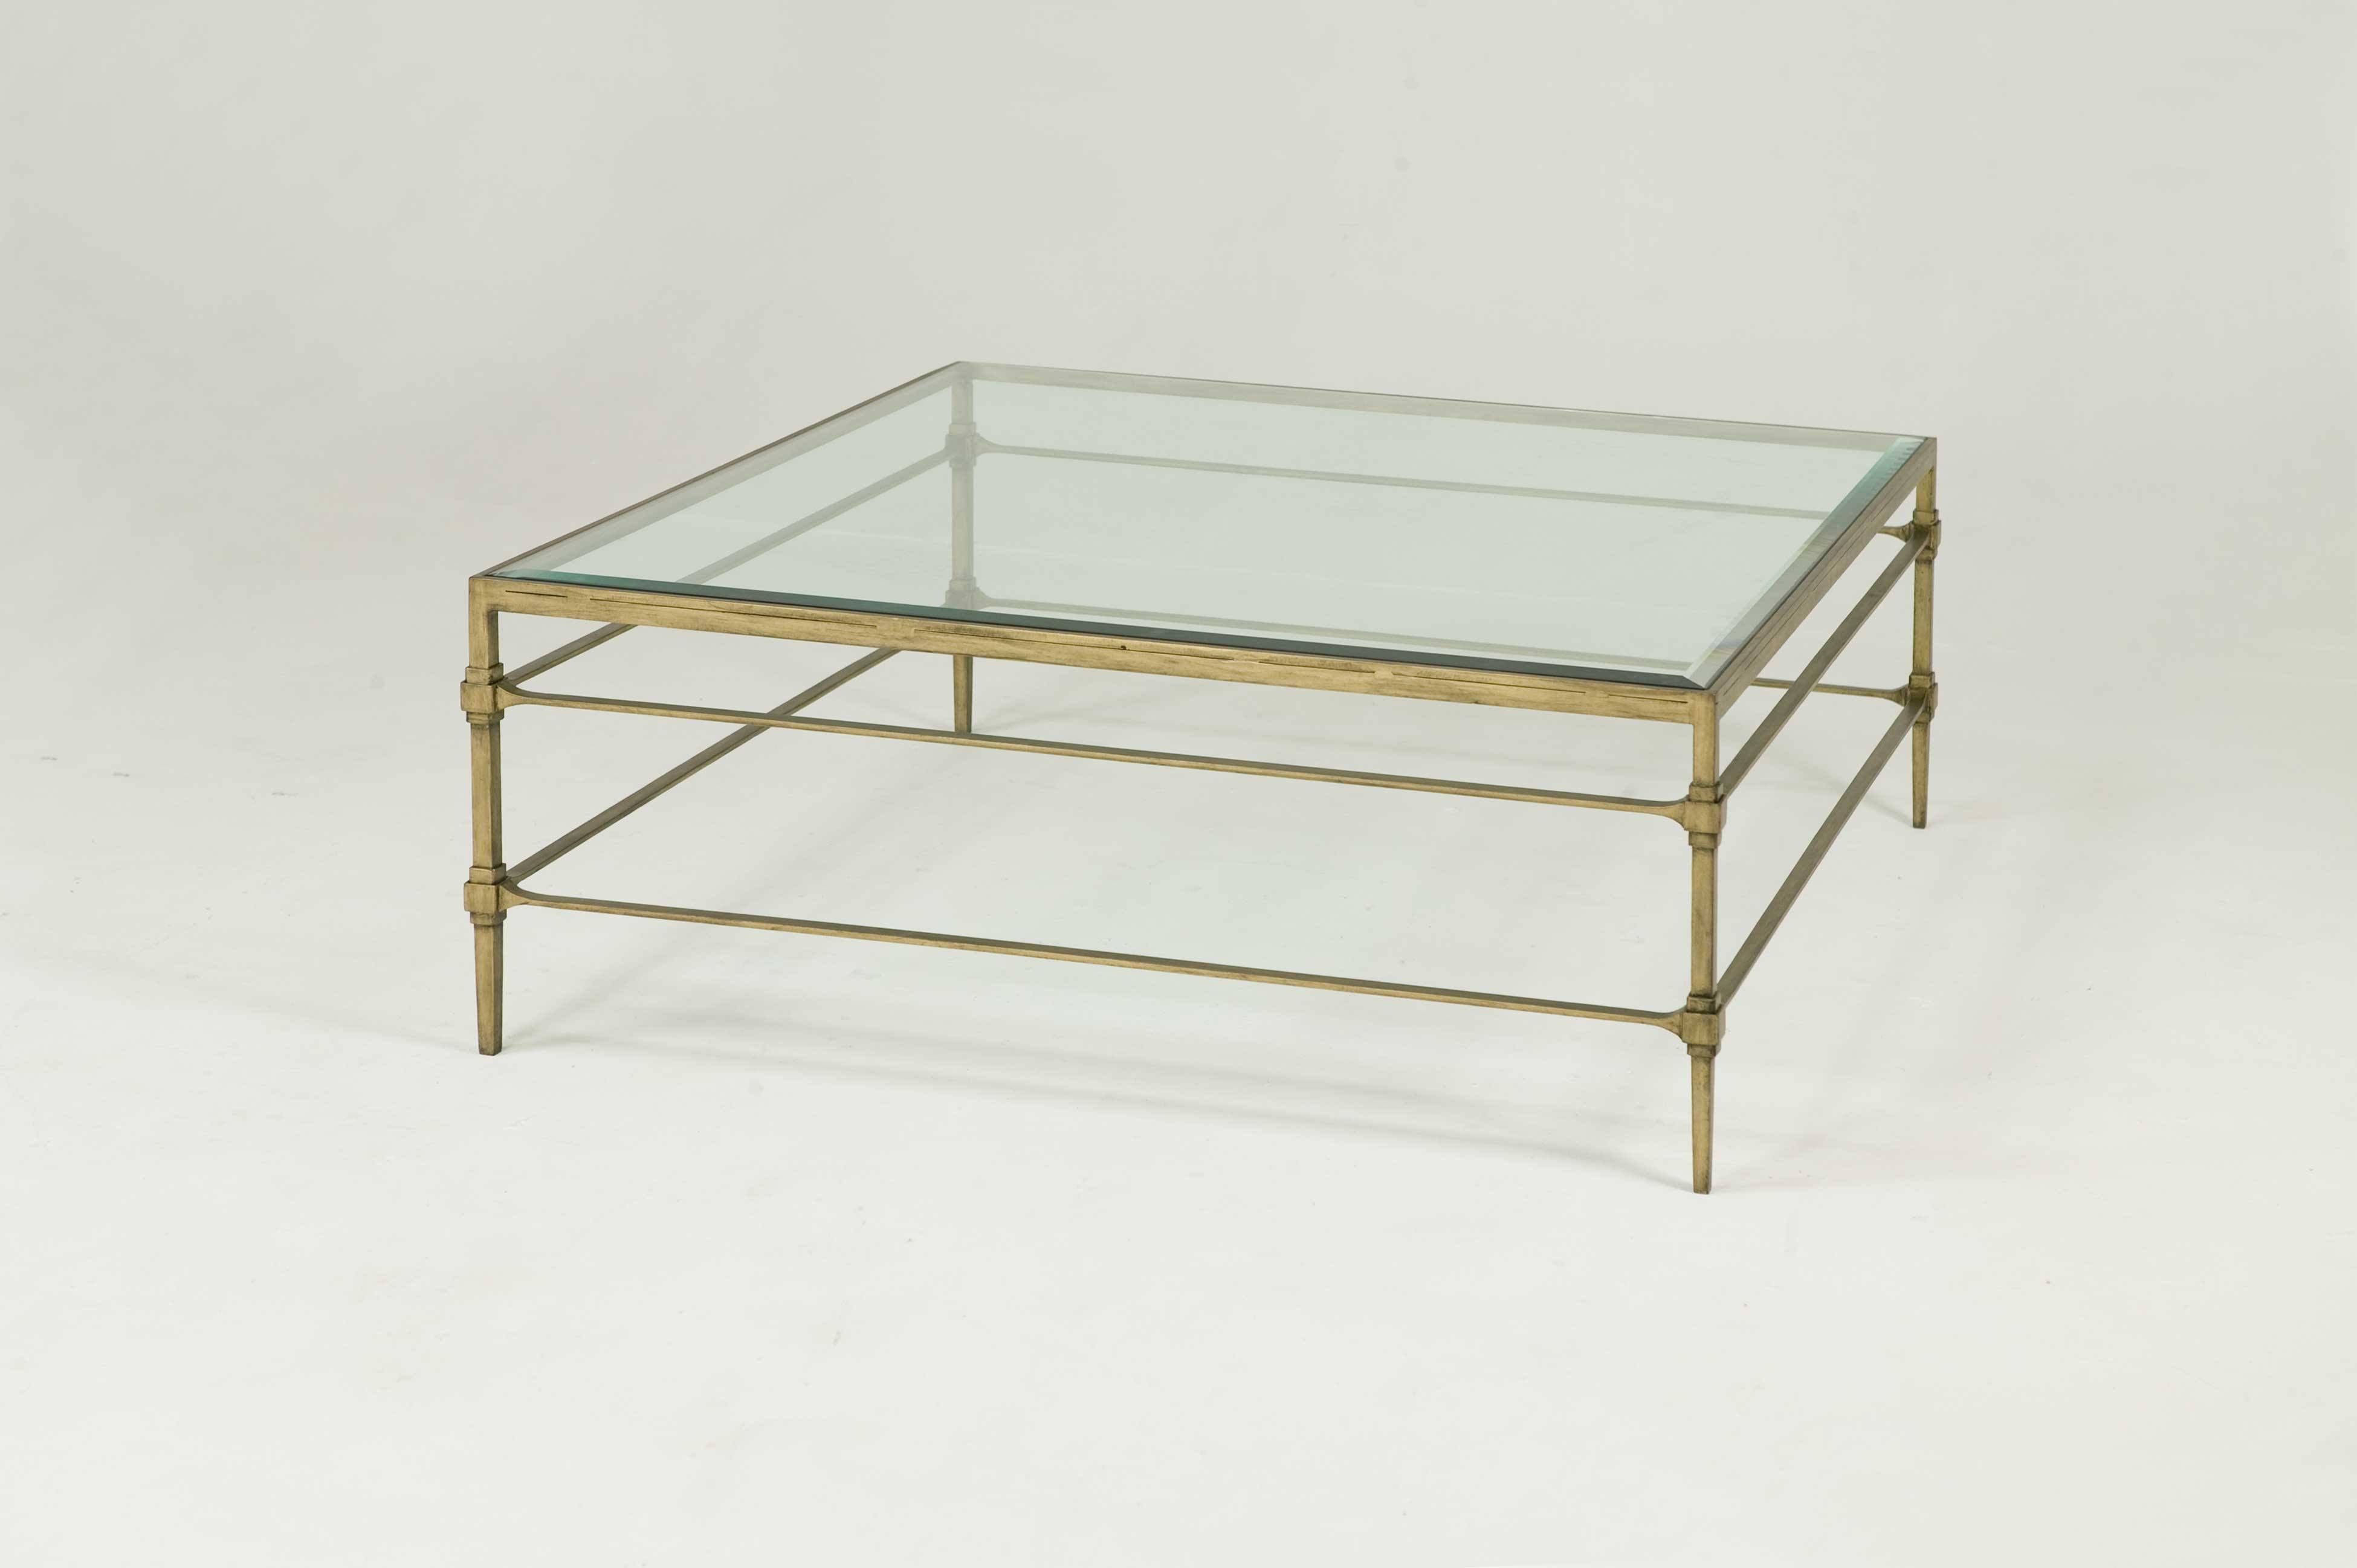 Large Square Coffee Table With Glass Top | Coffee Tables Decoration Throughout Glass Square Coffee Tables (View 1 of 30)